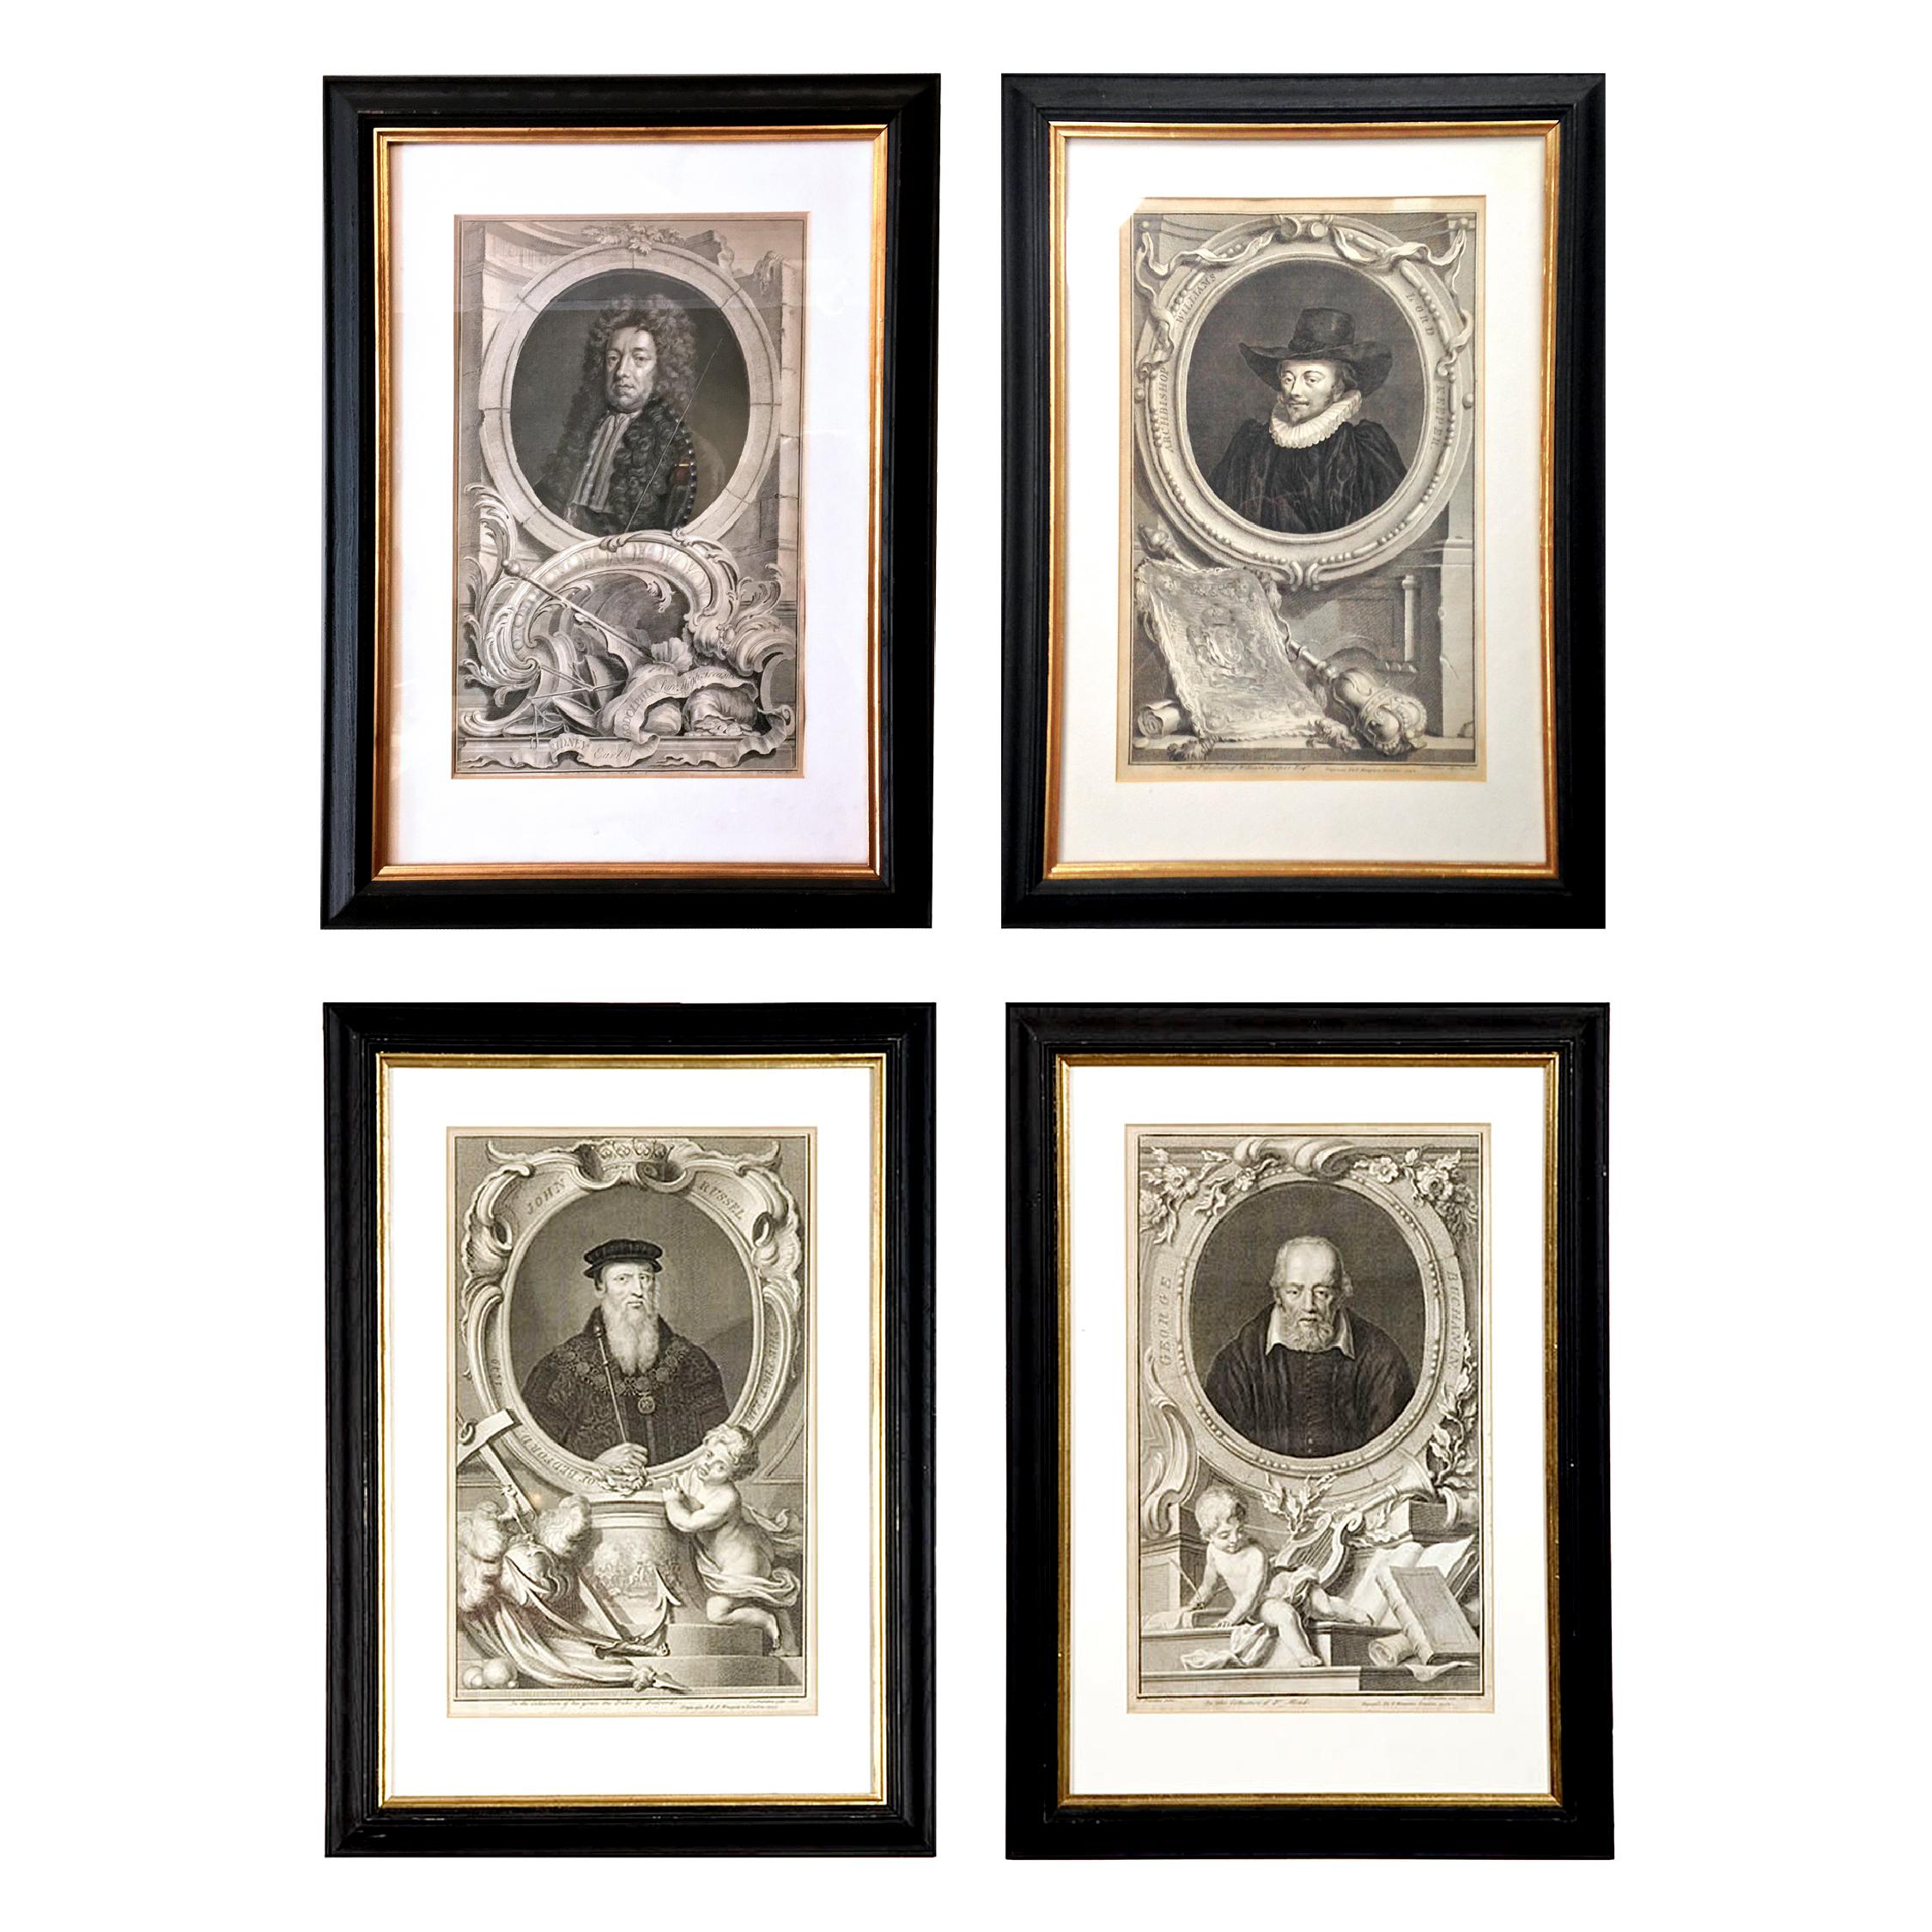 18th century prints for sale